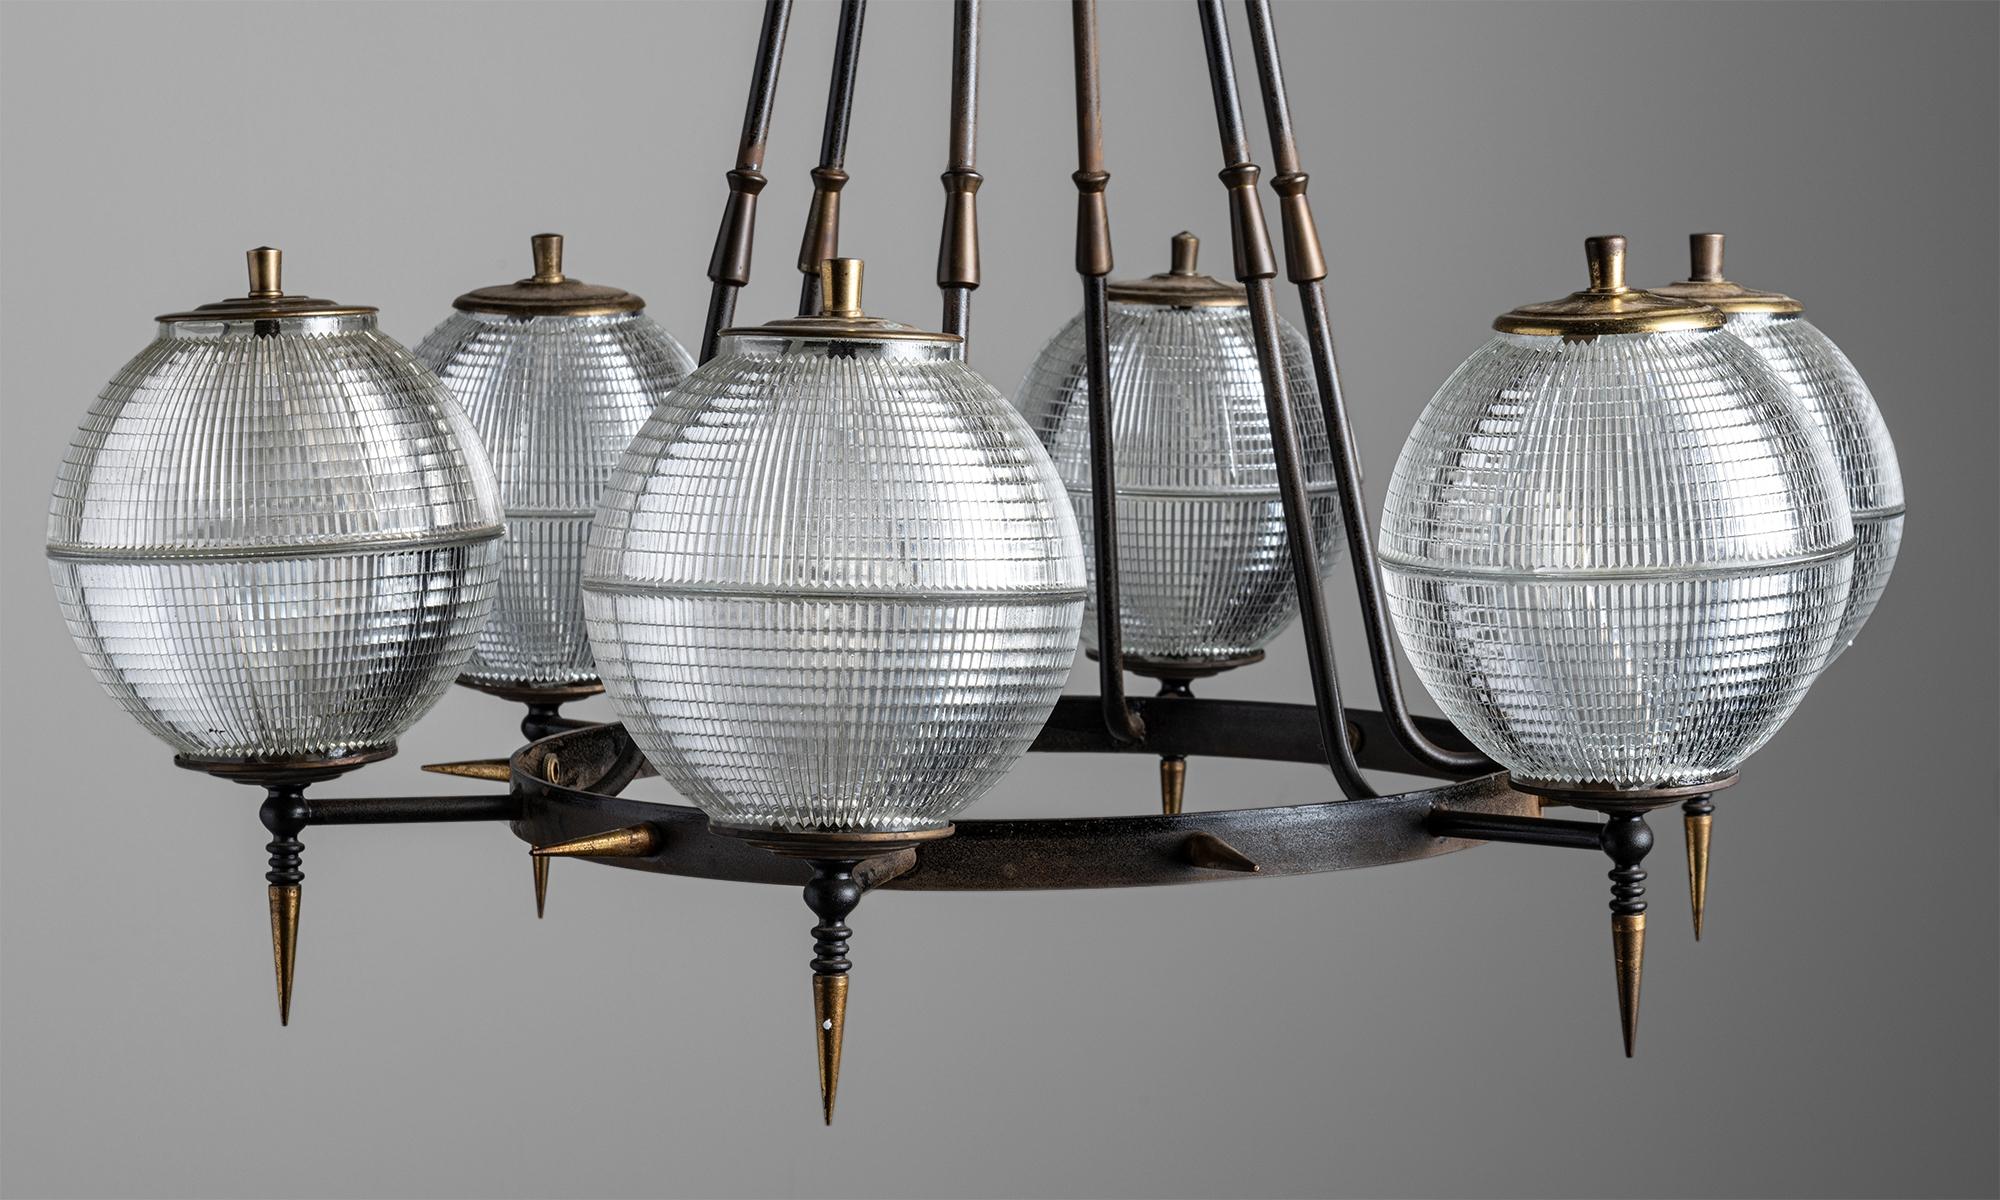 Brutalist Holophane chandelier,
Germany, circa 1960
Black metal with brass details and six holophane globes.
Measures: 29.5” diameter x 23.25” height.